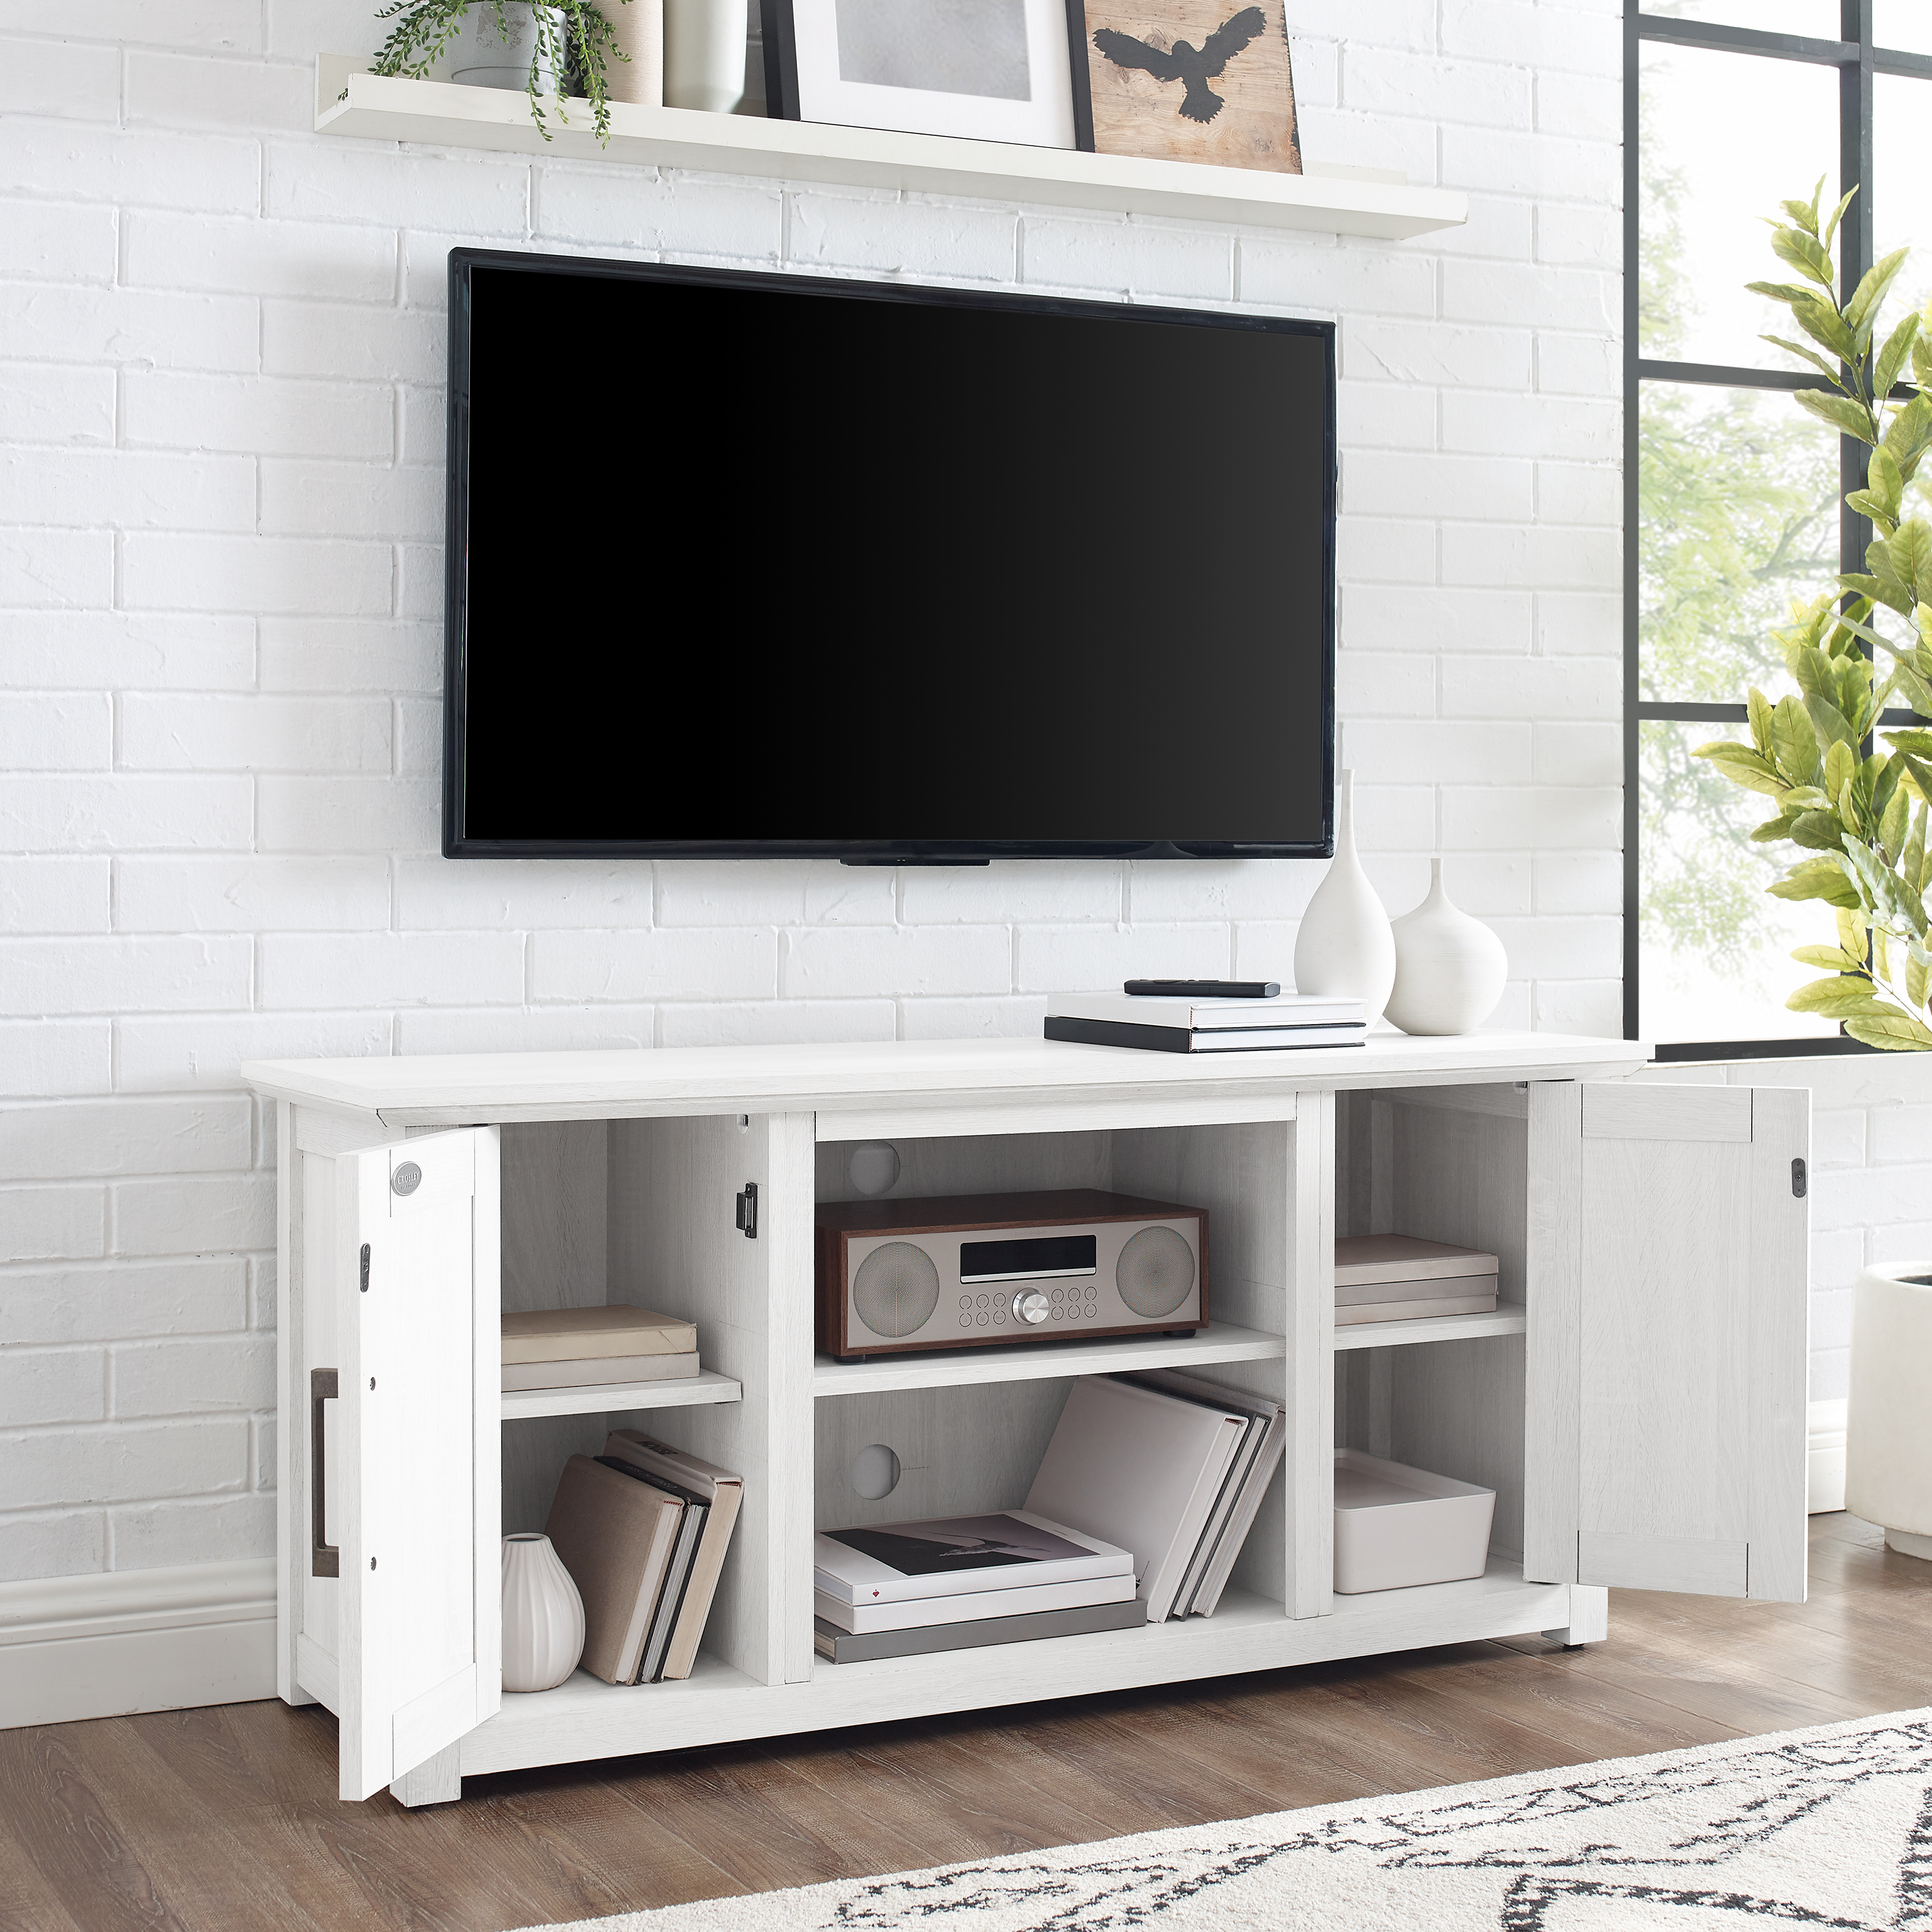 Crosley Camden 48" Rustic Low Profile TV Stand in Whitewash - image 4 of 15